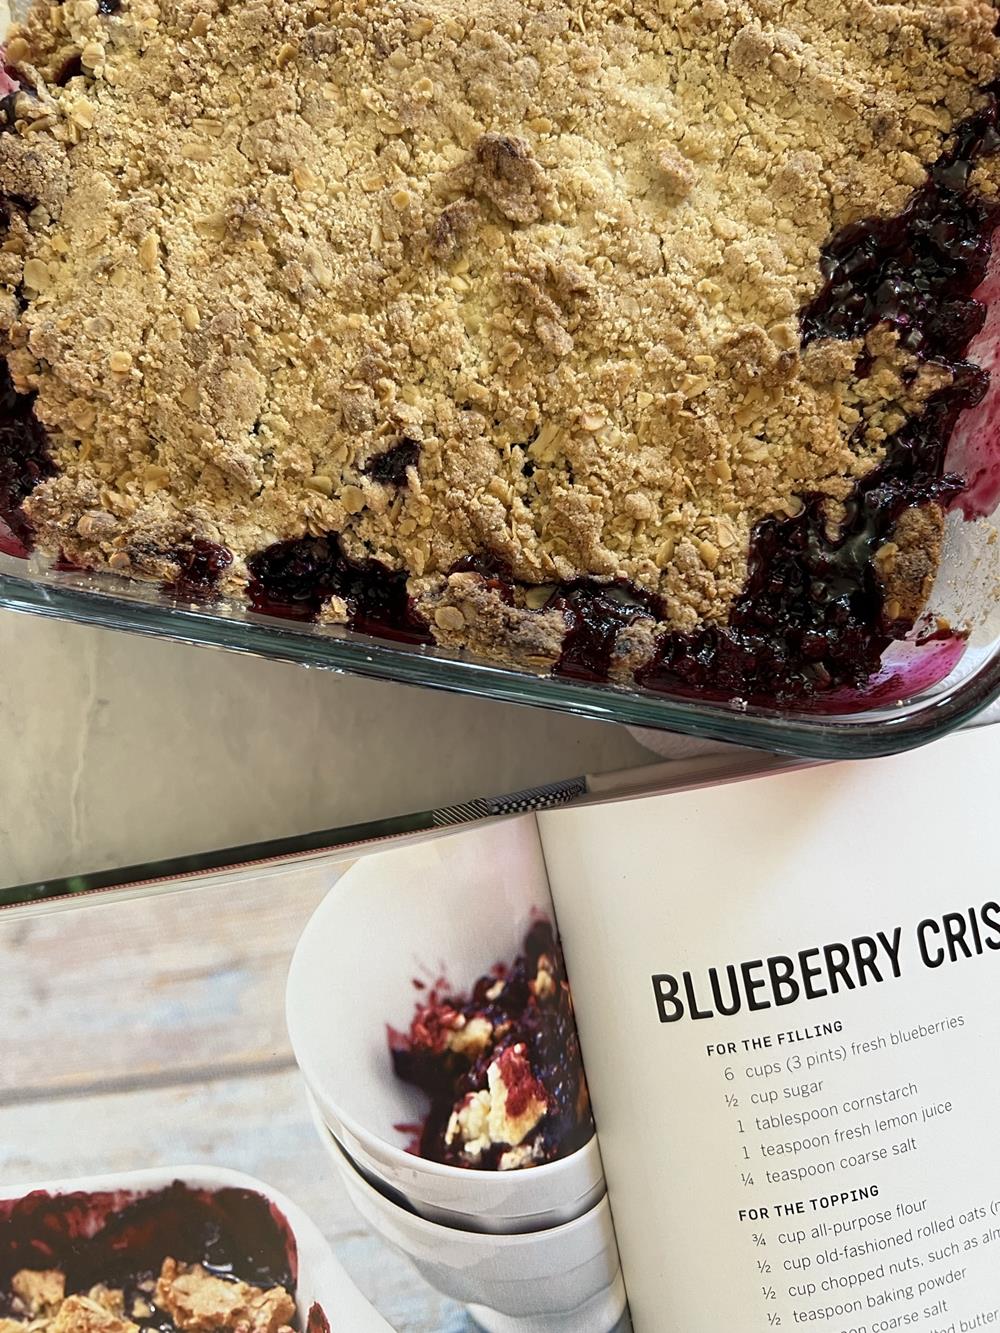 Cookbook with blueberry crisp in background